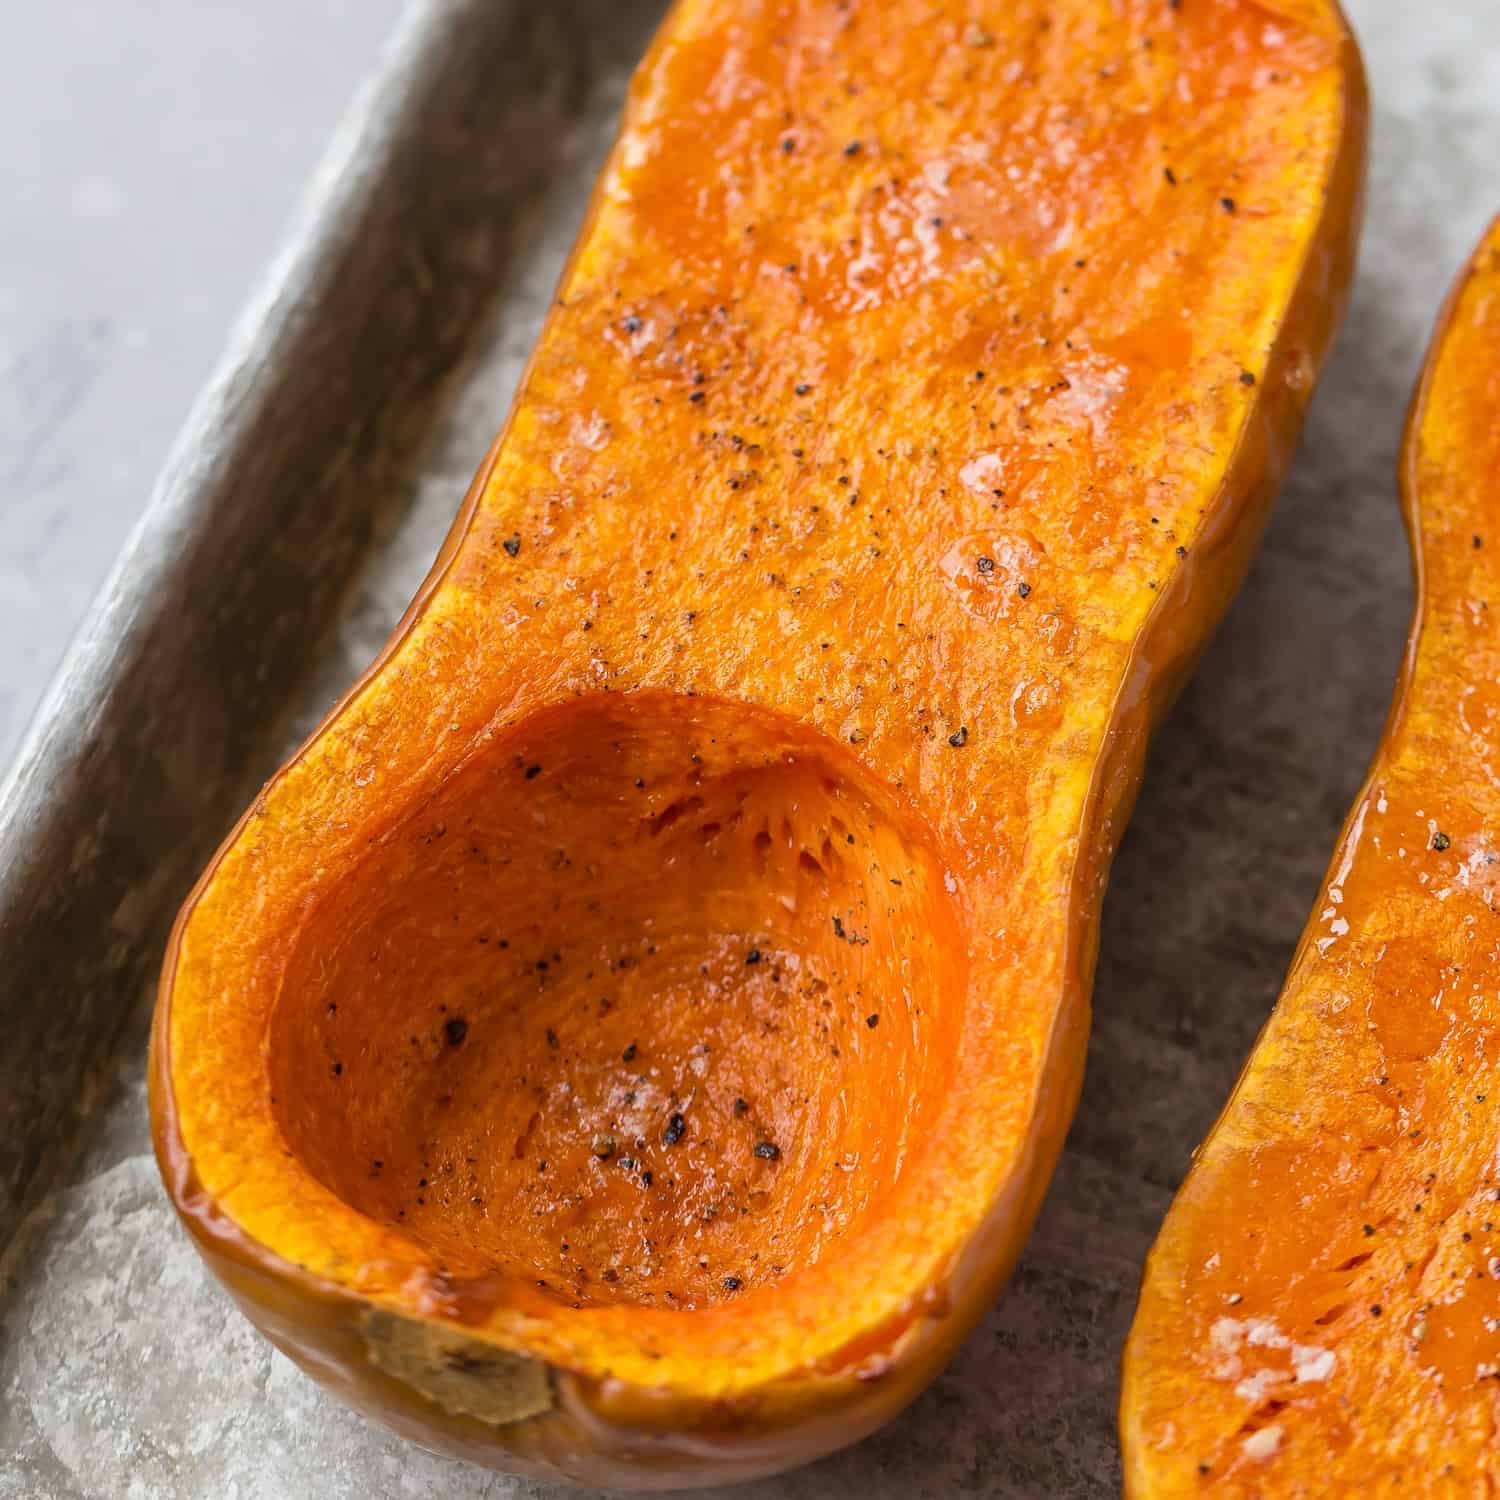 https://www.rachelcooks.com/wp-content/uploads/2022/08/how-to-cook-butternut-squash-1500-2-square.jpg